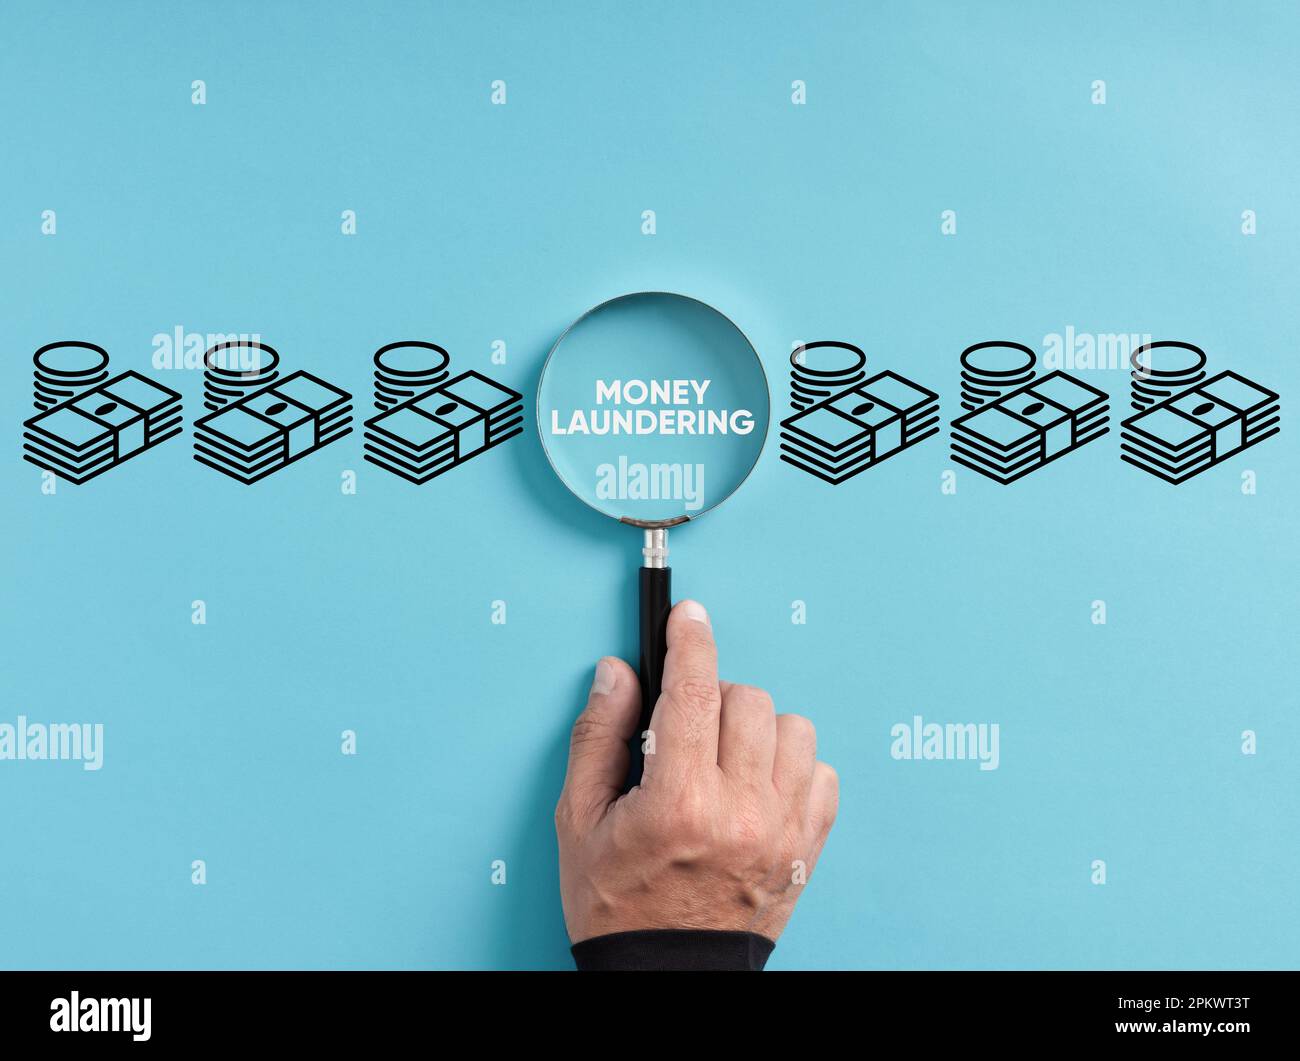 Finding or discovering money laundering crime or fraud. Hand holds magnifying glass focusing on the word money laundering next to money symbols. Stock Photo